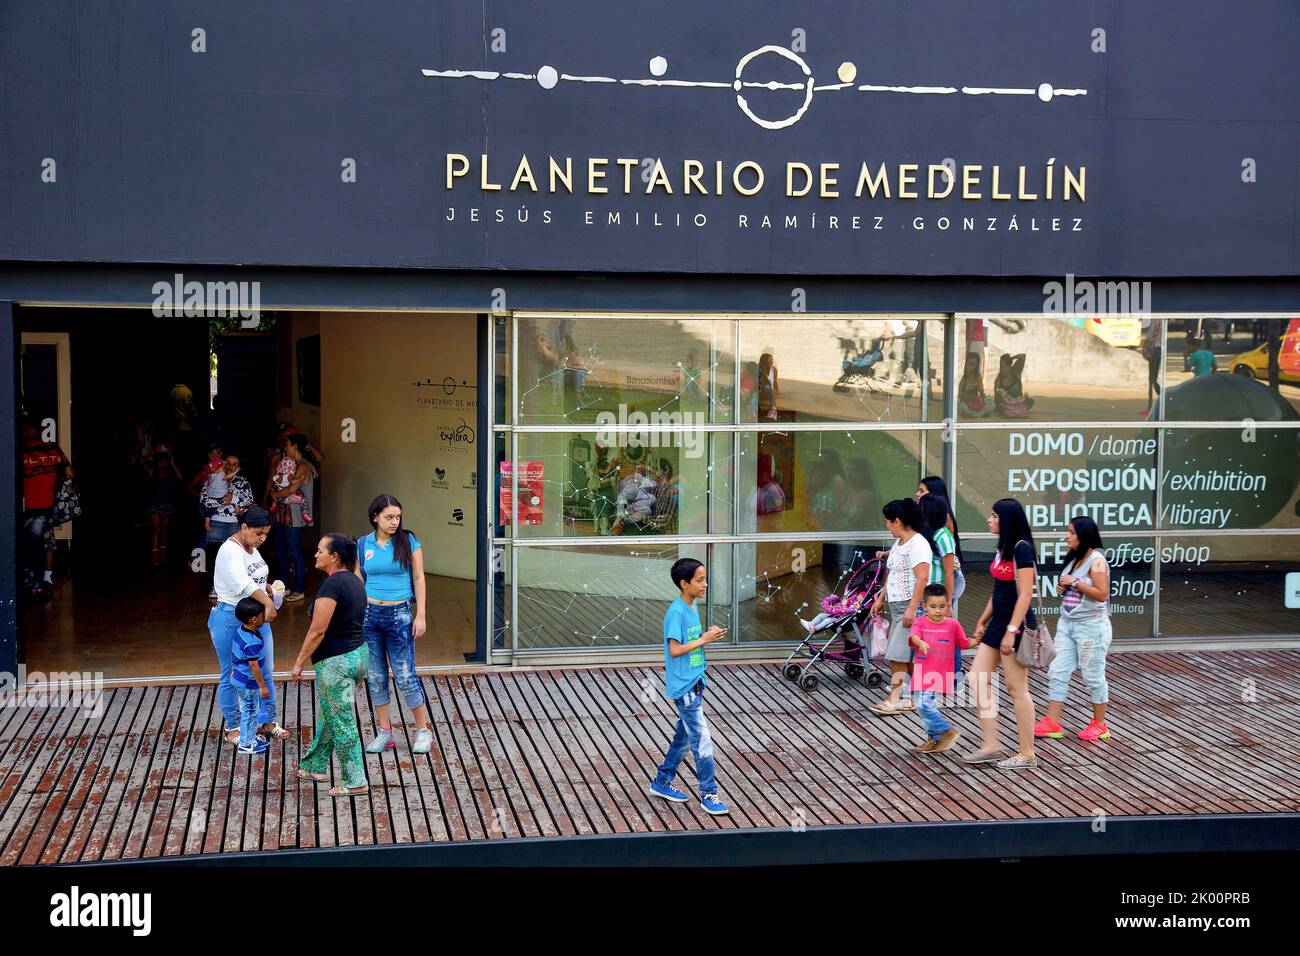 Colombia,Medellin,Planetario museum is near Universidad metro station where people can relax on the square next to Explora Parque with activities for Stock Photo